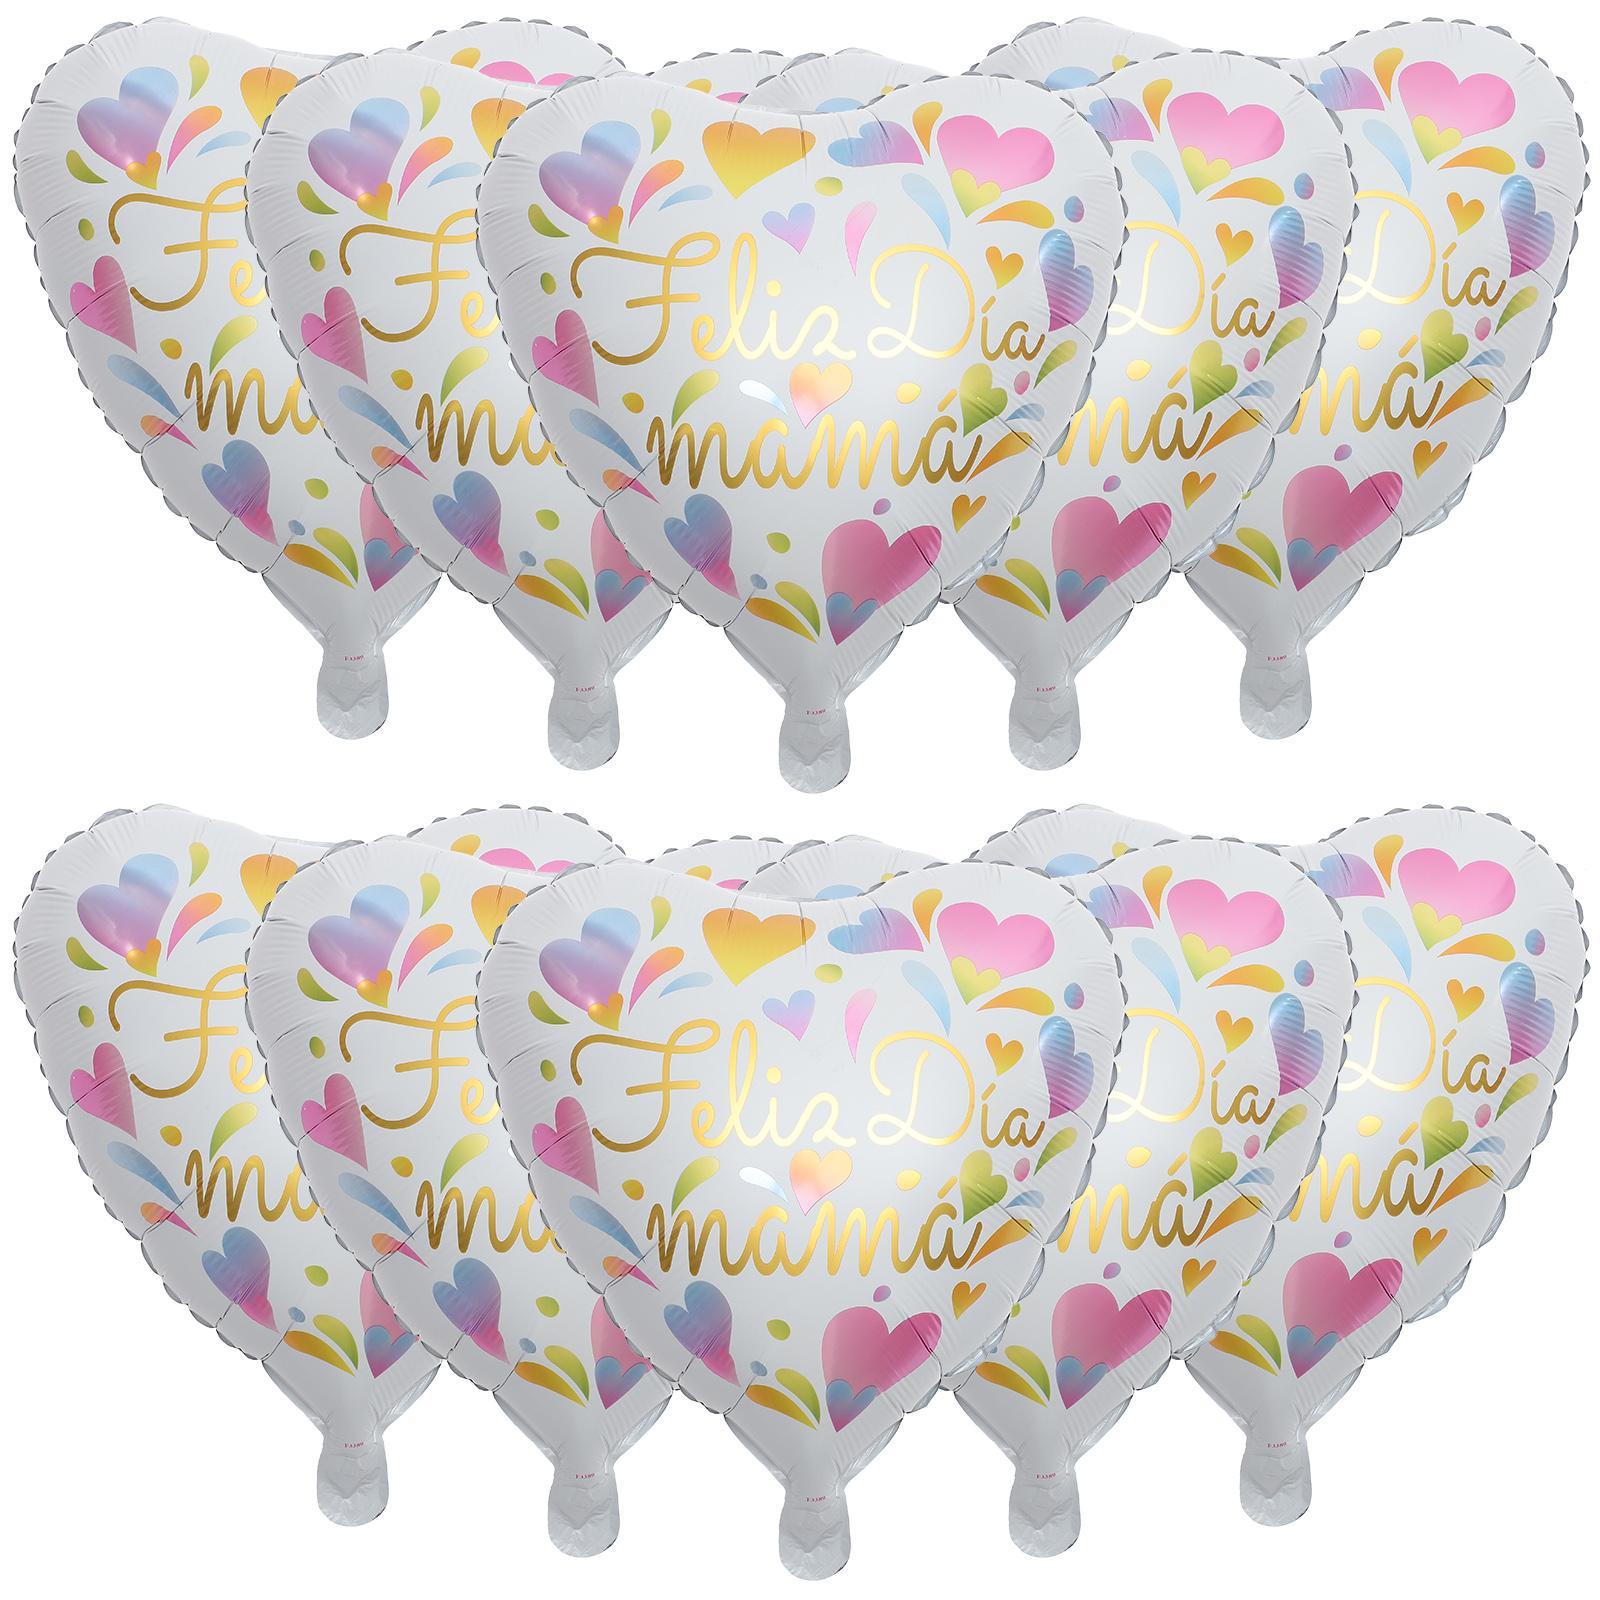 10 Pcs Mother's Day Balloons Heart House Ornaments Metal Outdoor Decor Household Decorate